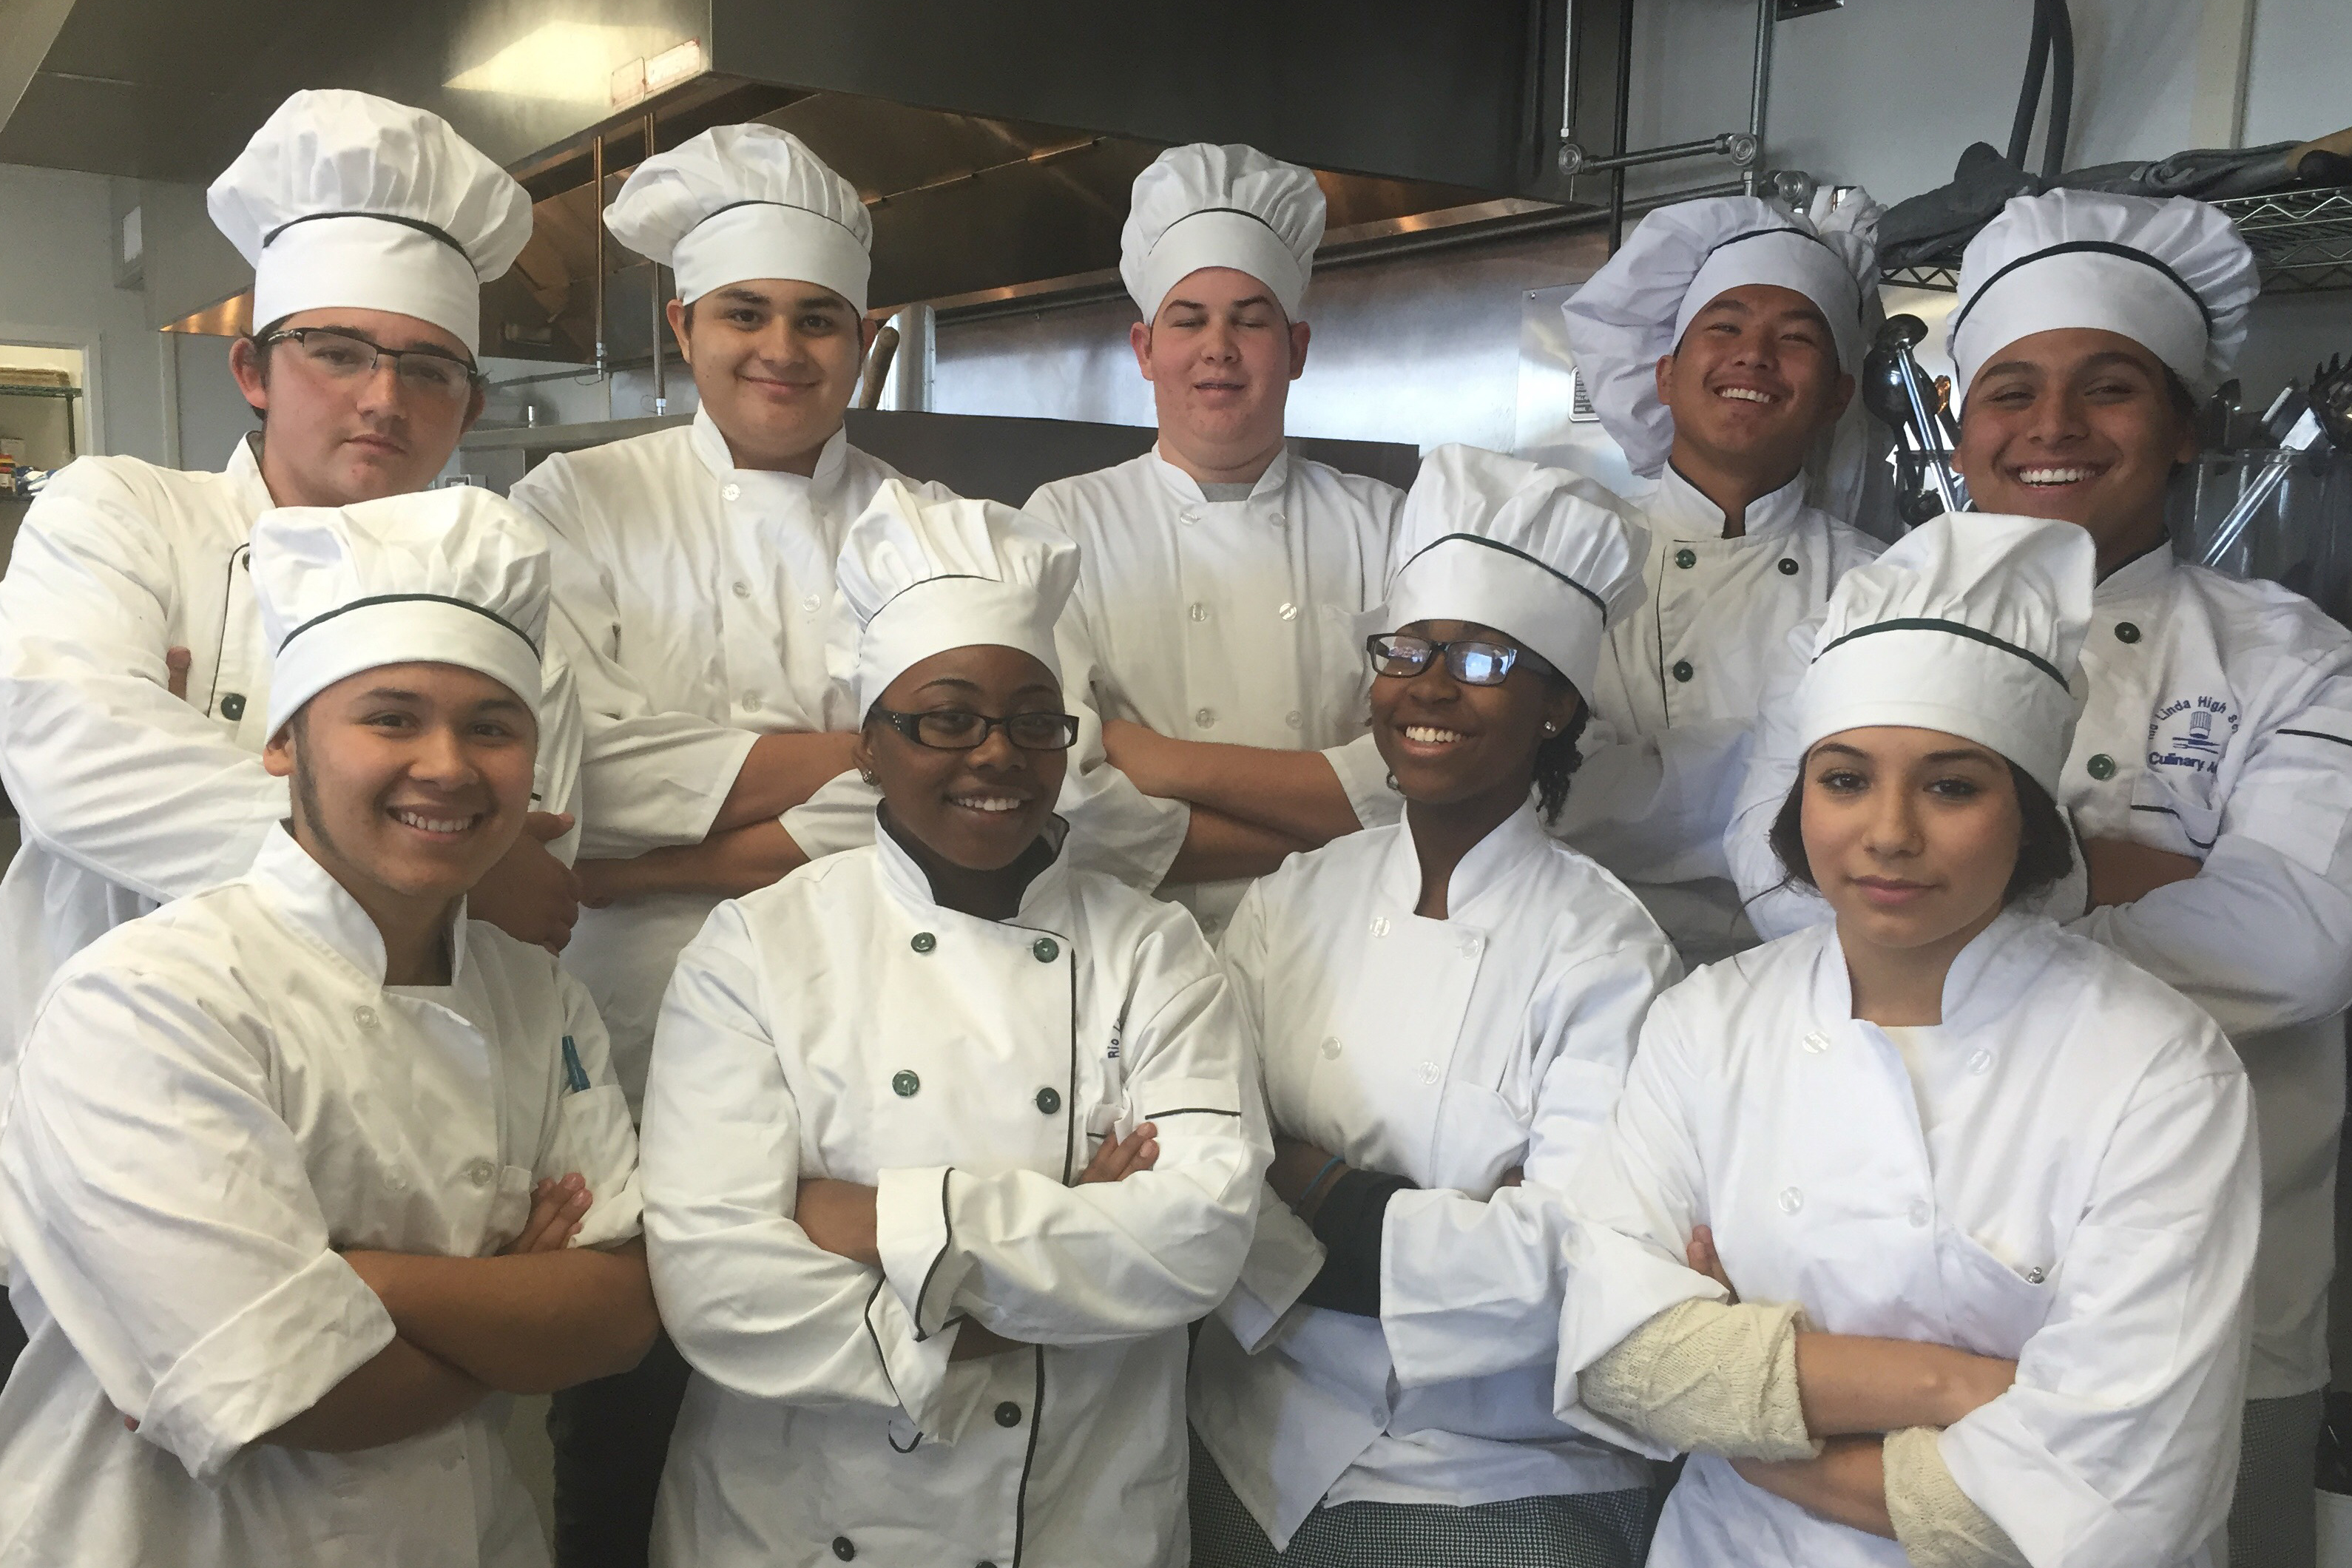 Culinary students dressed up in chef outfits in the kitchen standing together in a group